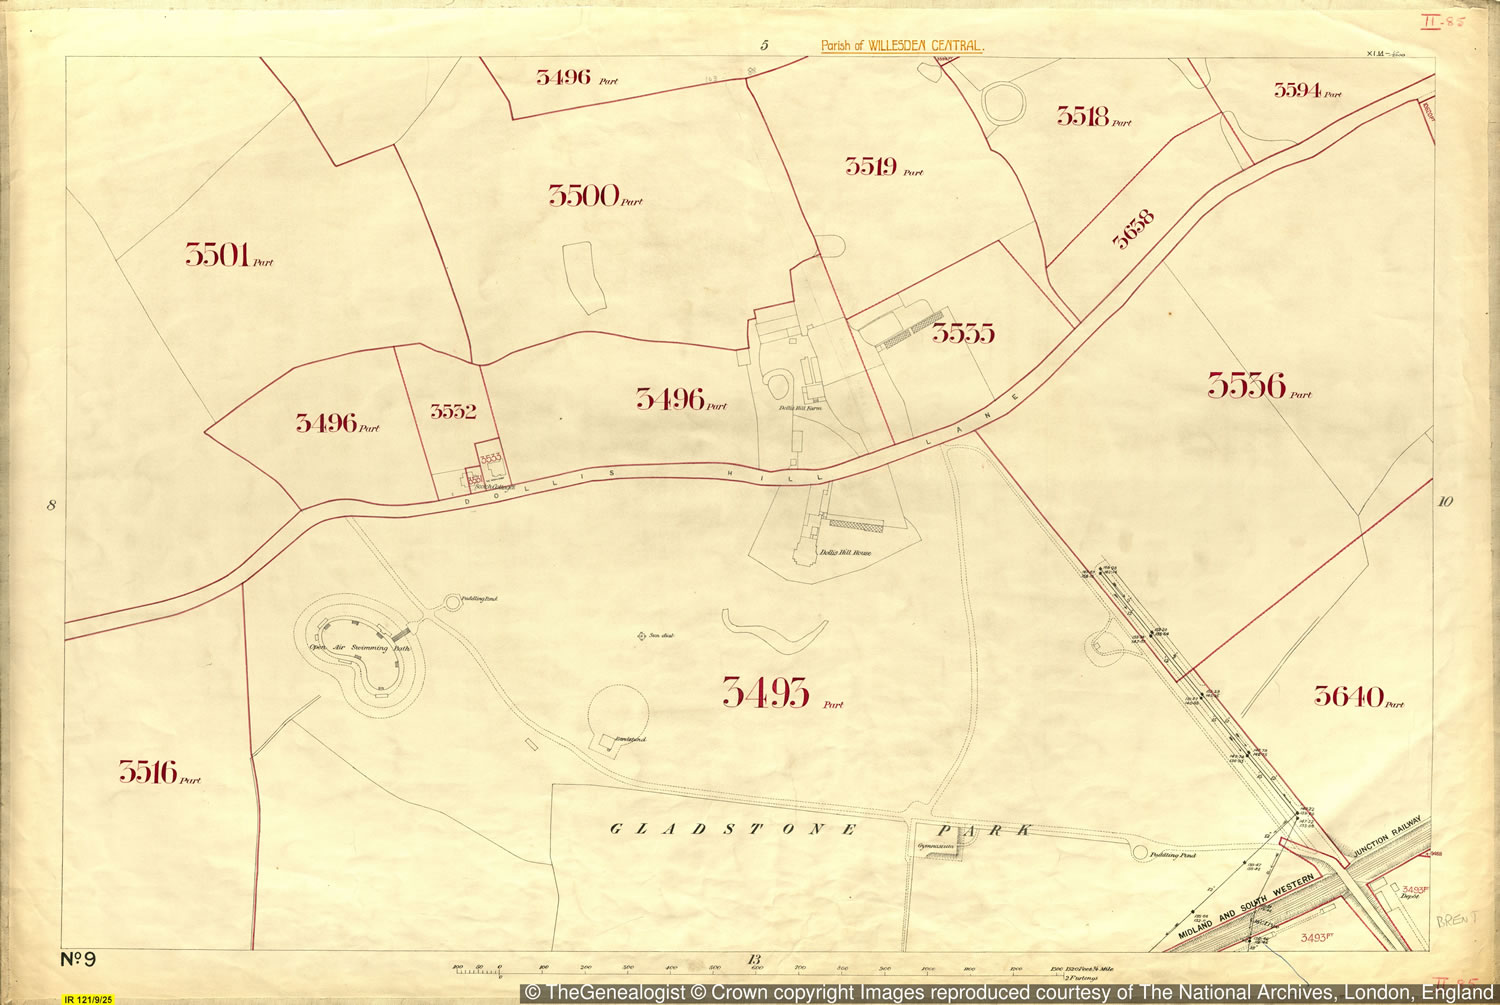 IR121 map of Brent detailing Dollis Hill House, Gladstone Park and Dollis Hill Farm to the north of the lane